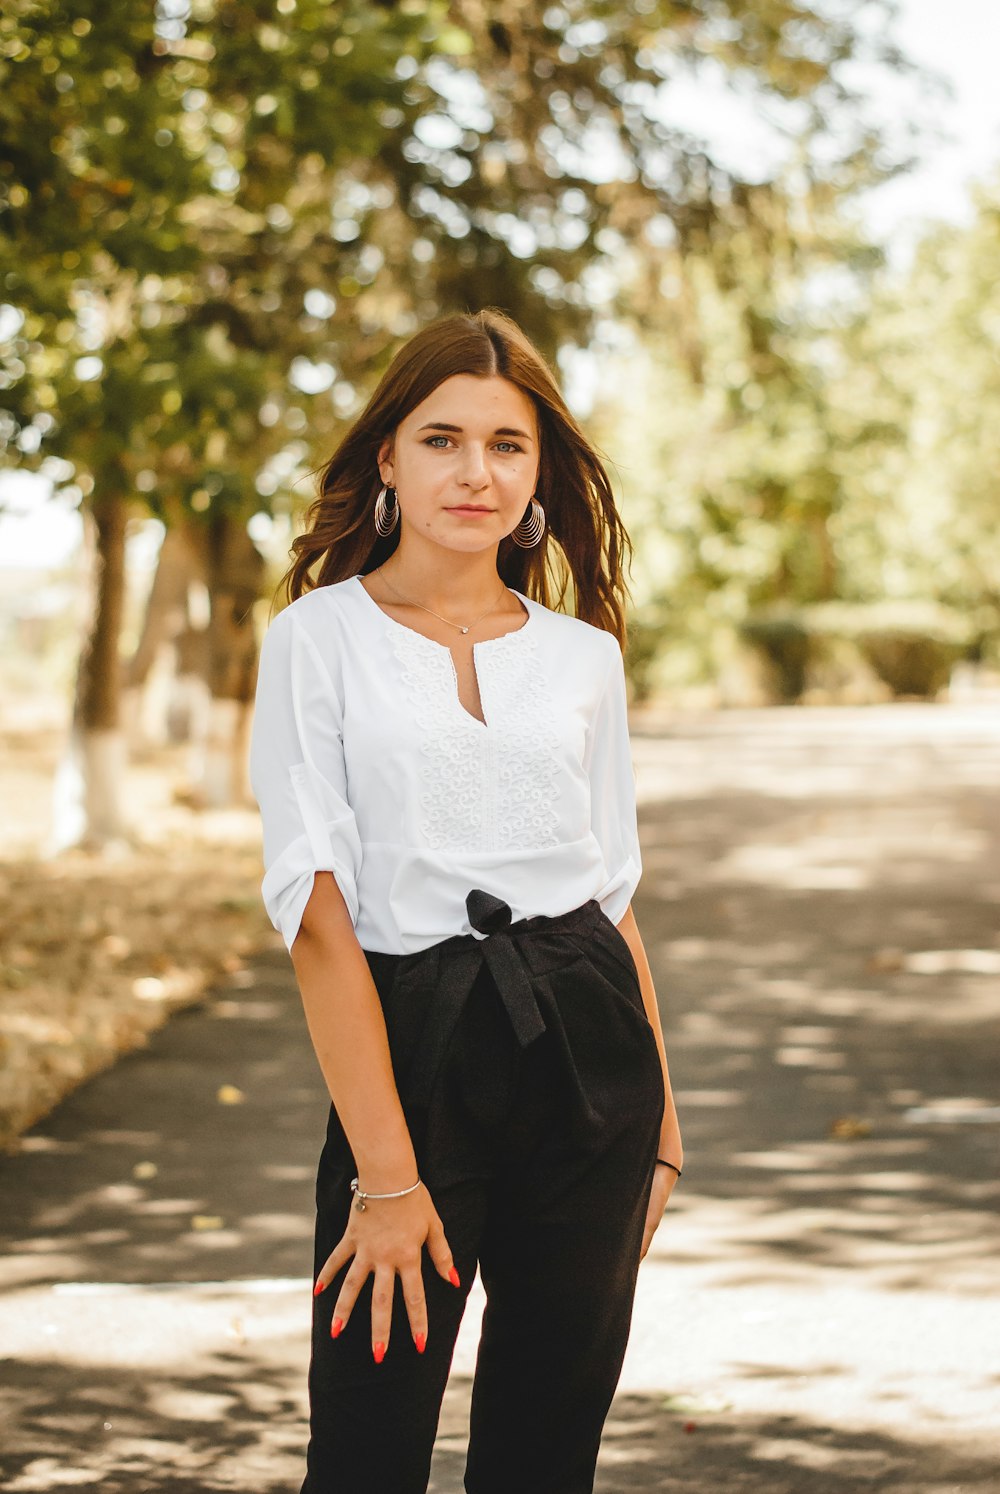 woman in white shirt and black skirt standing on road during daytime